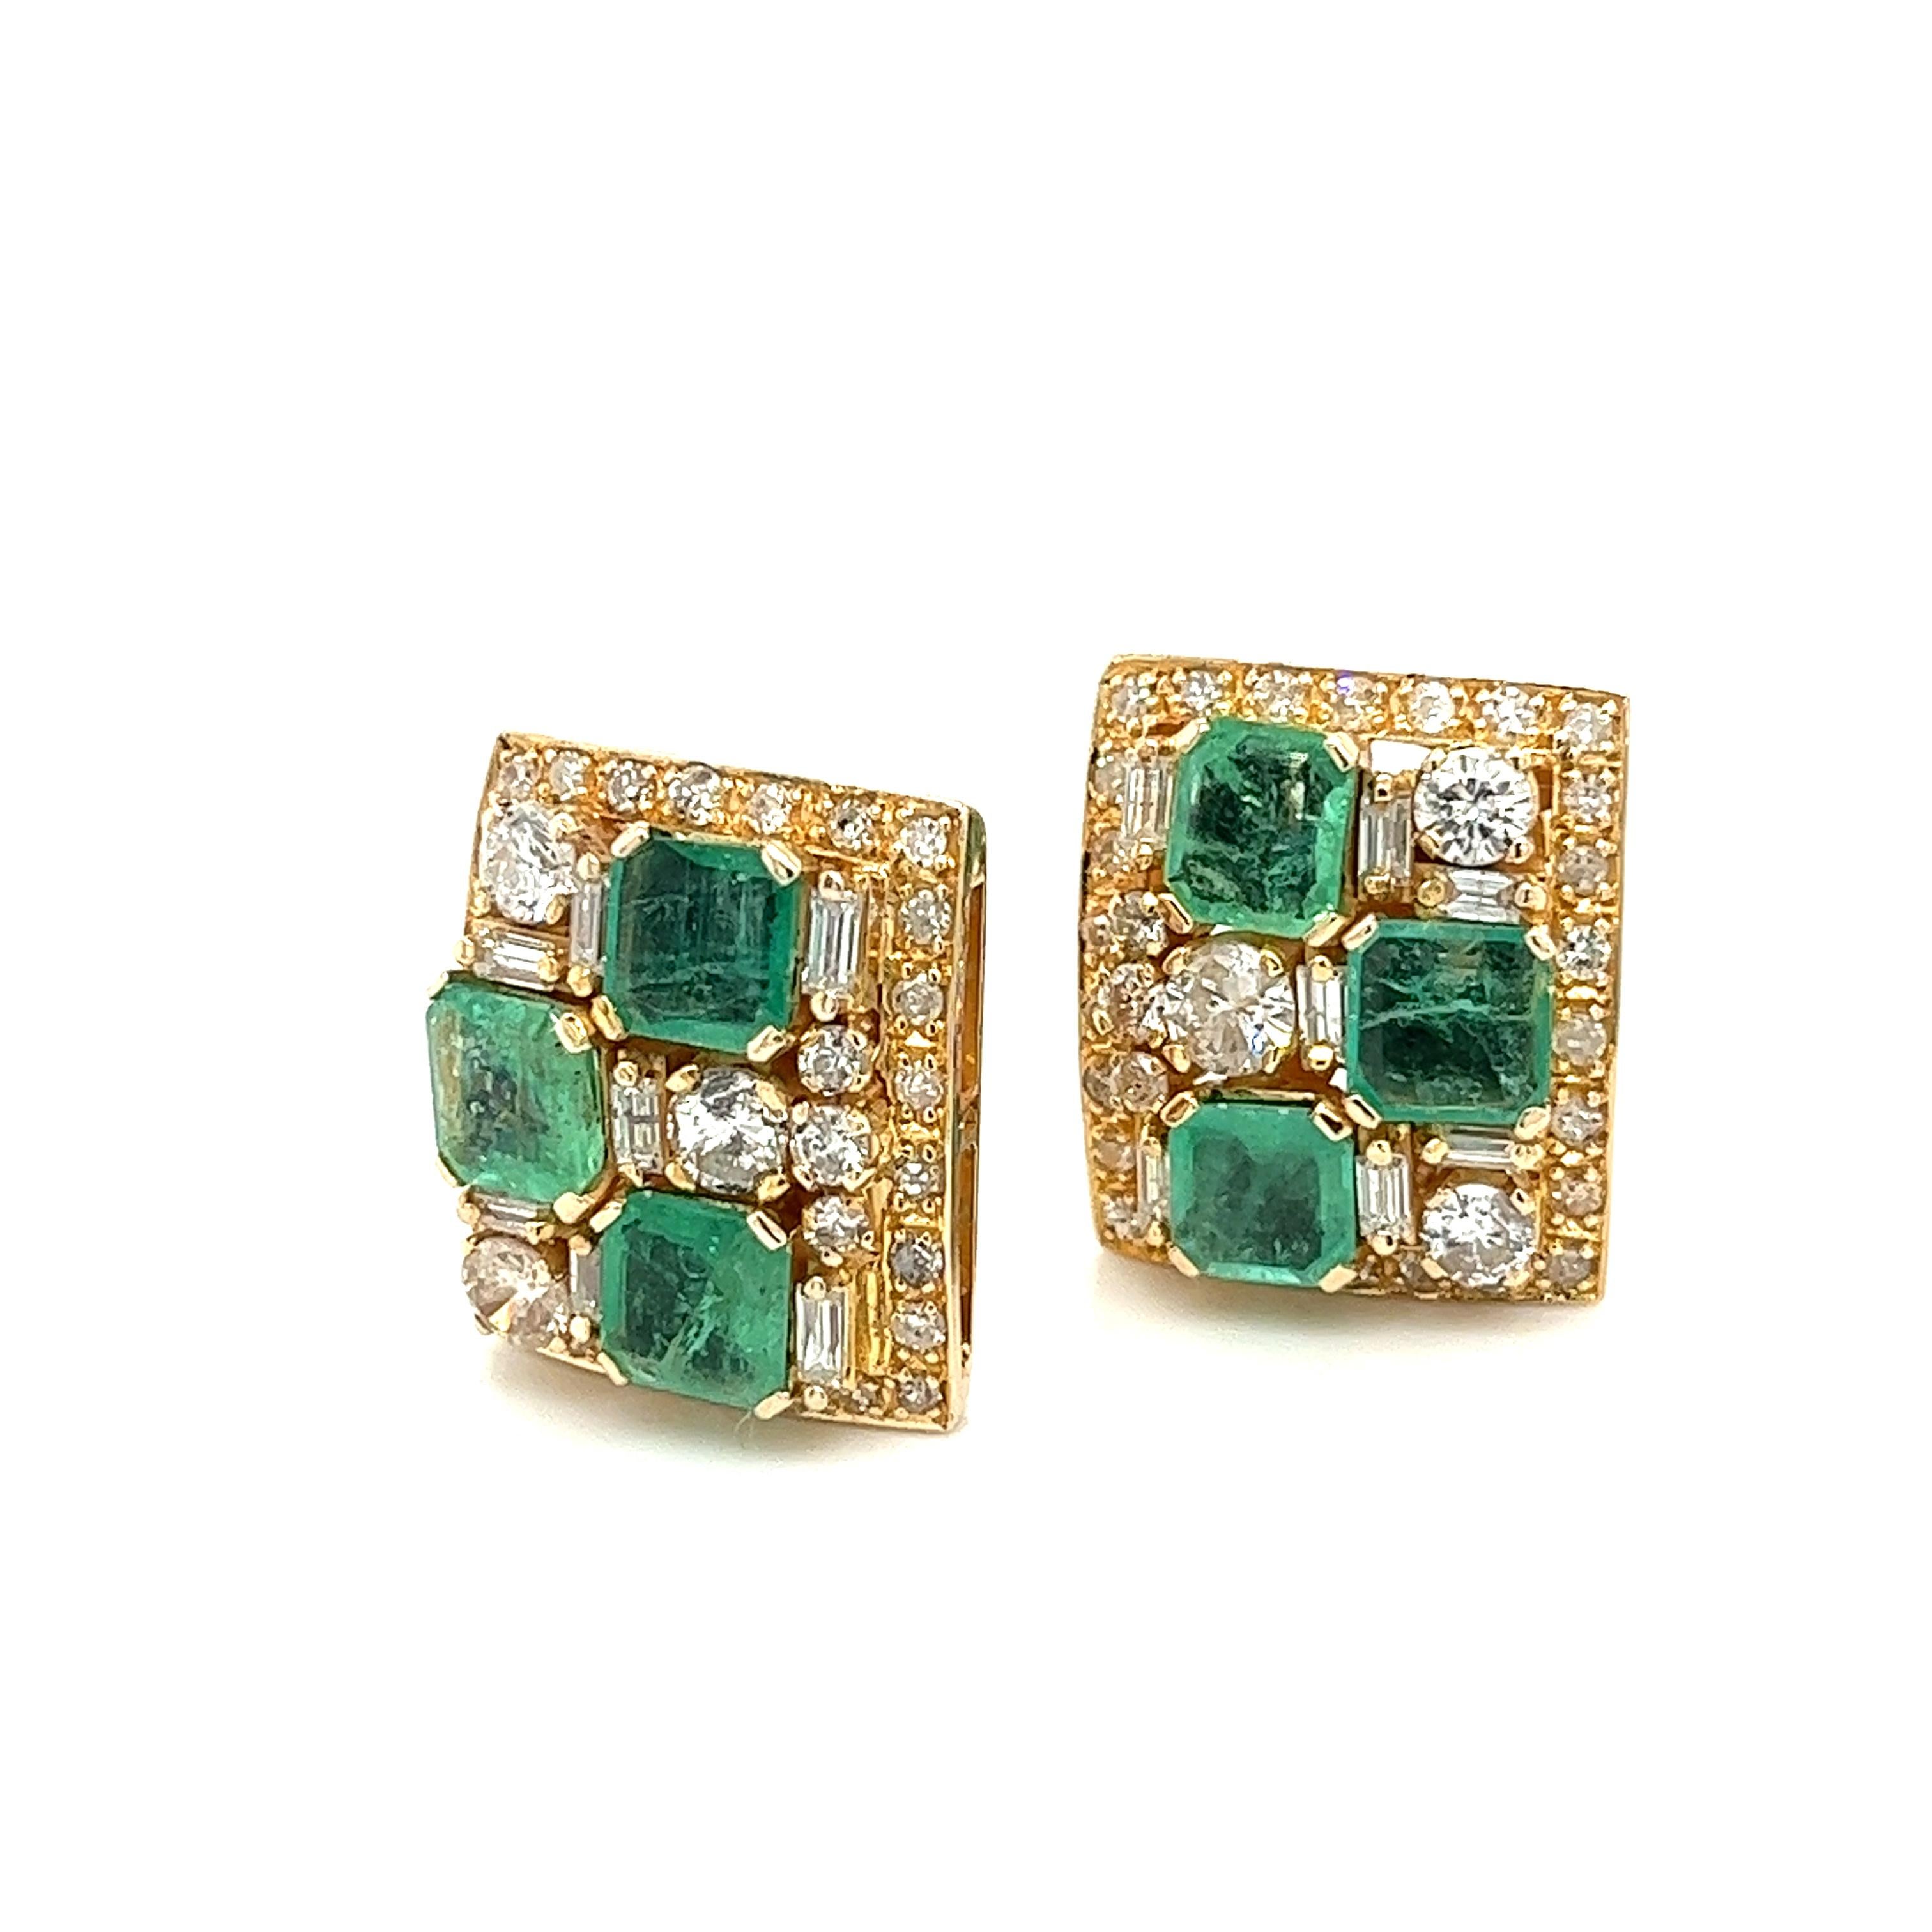 Art Deco Vintage Natural Emerald & Diamond Earring and Ring Jewelry Set in 18k Gold For Sale